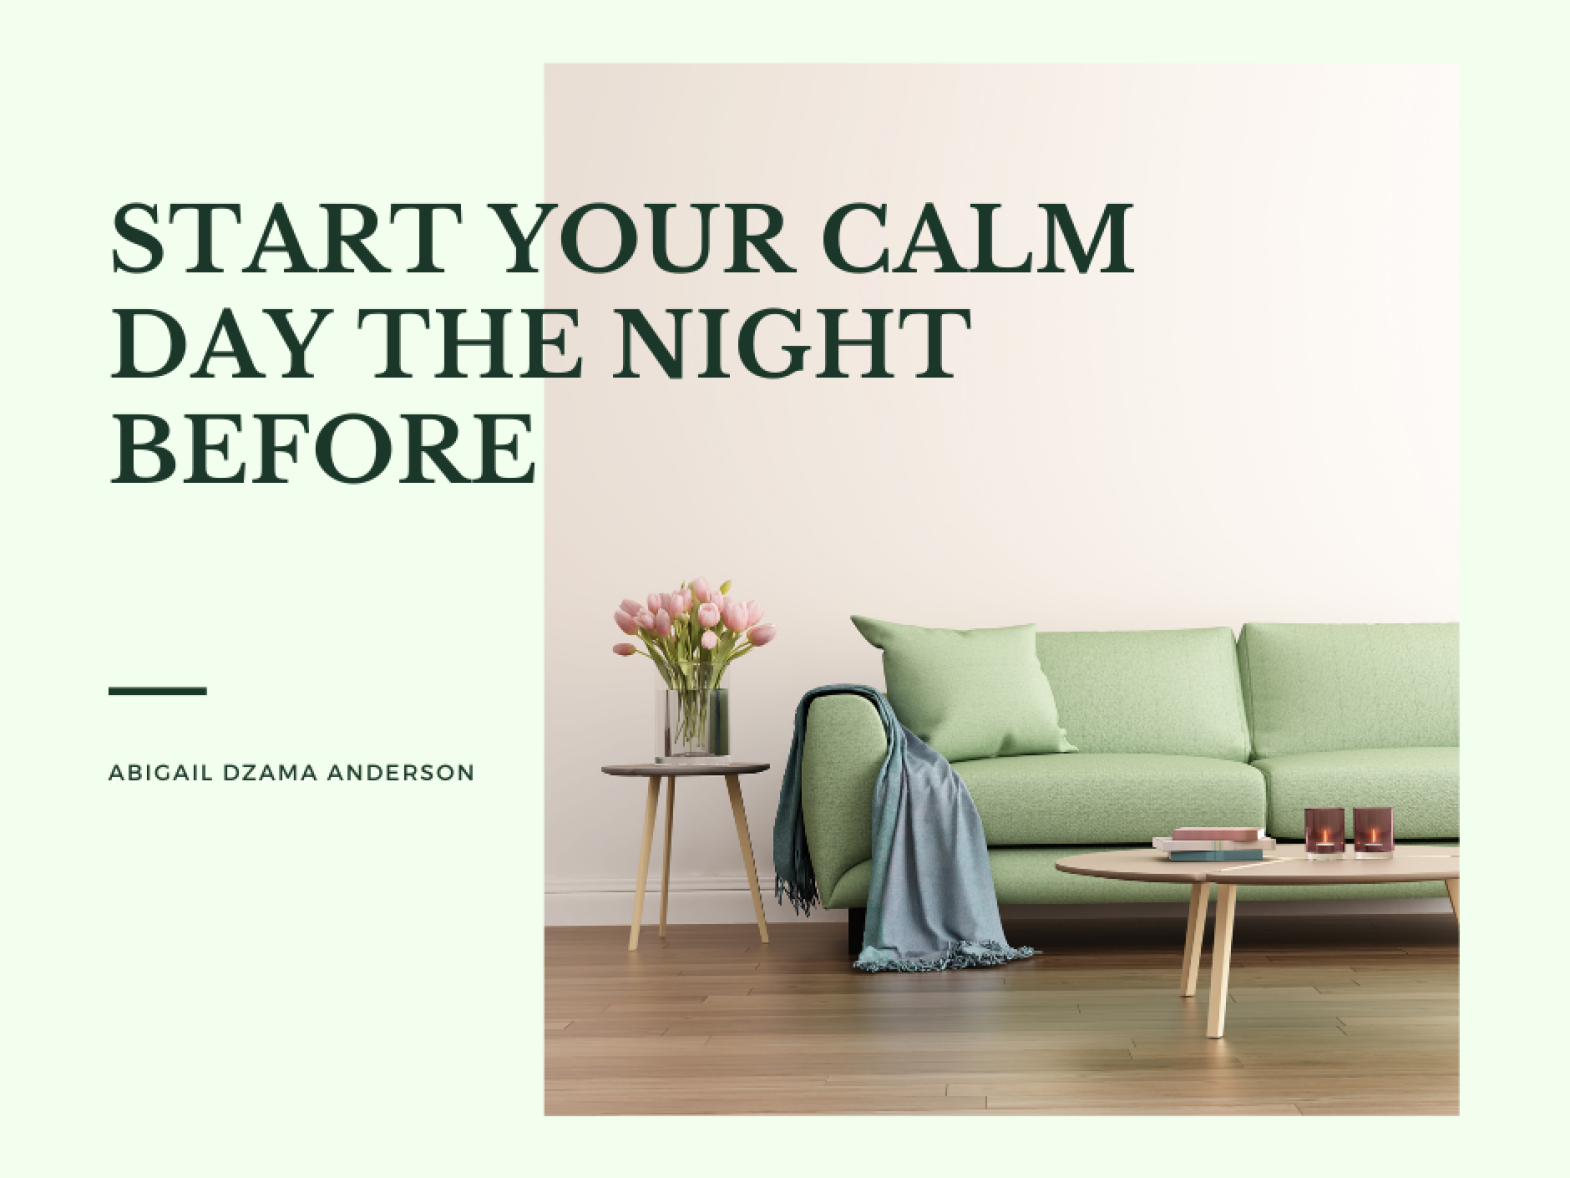 Start Your Calm Day the Night Before